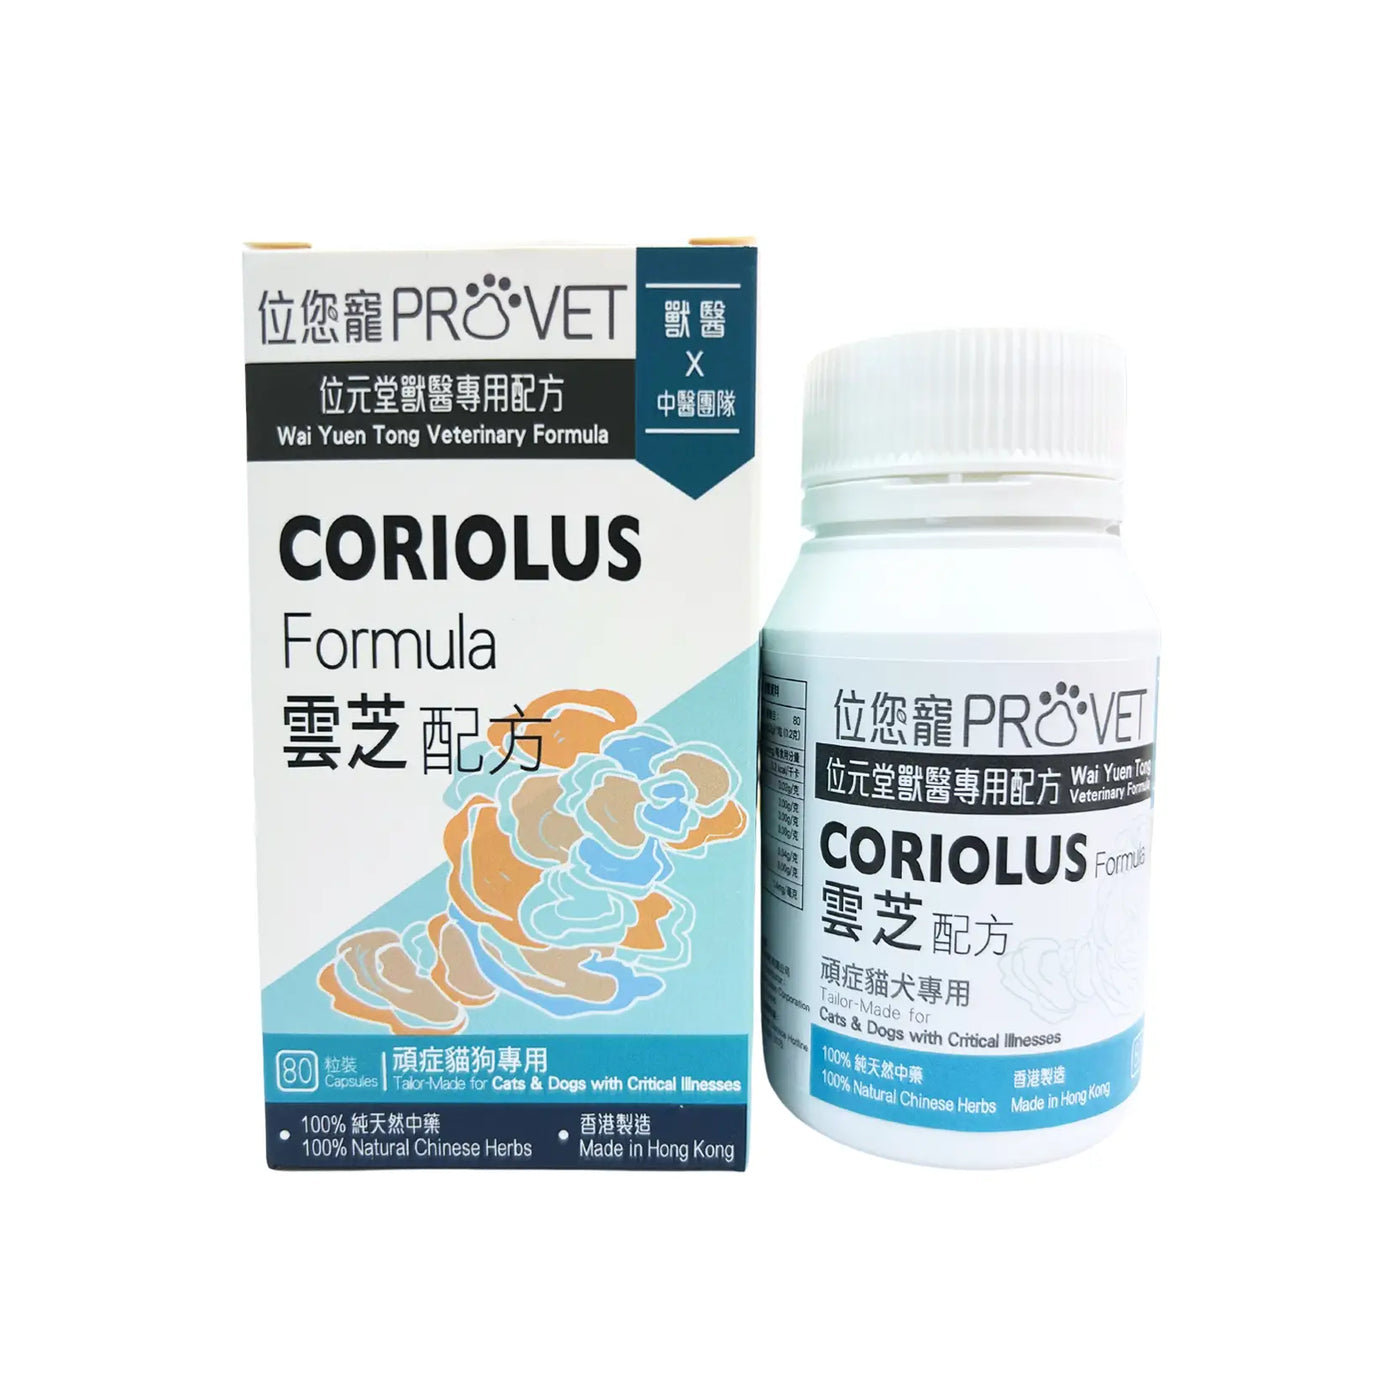 ProVet 100% Coriolus Formula For Dogs & Cats with Chronic Illnesses 80 capsules